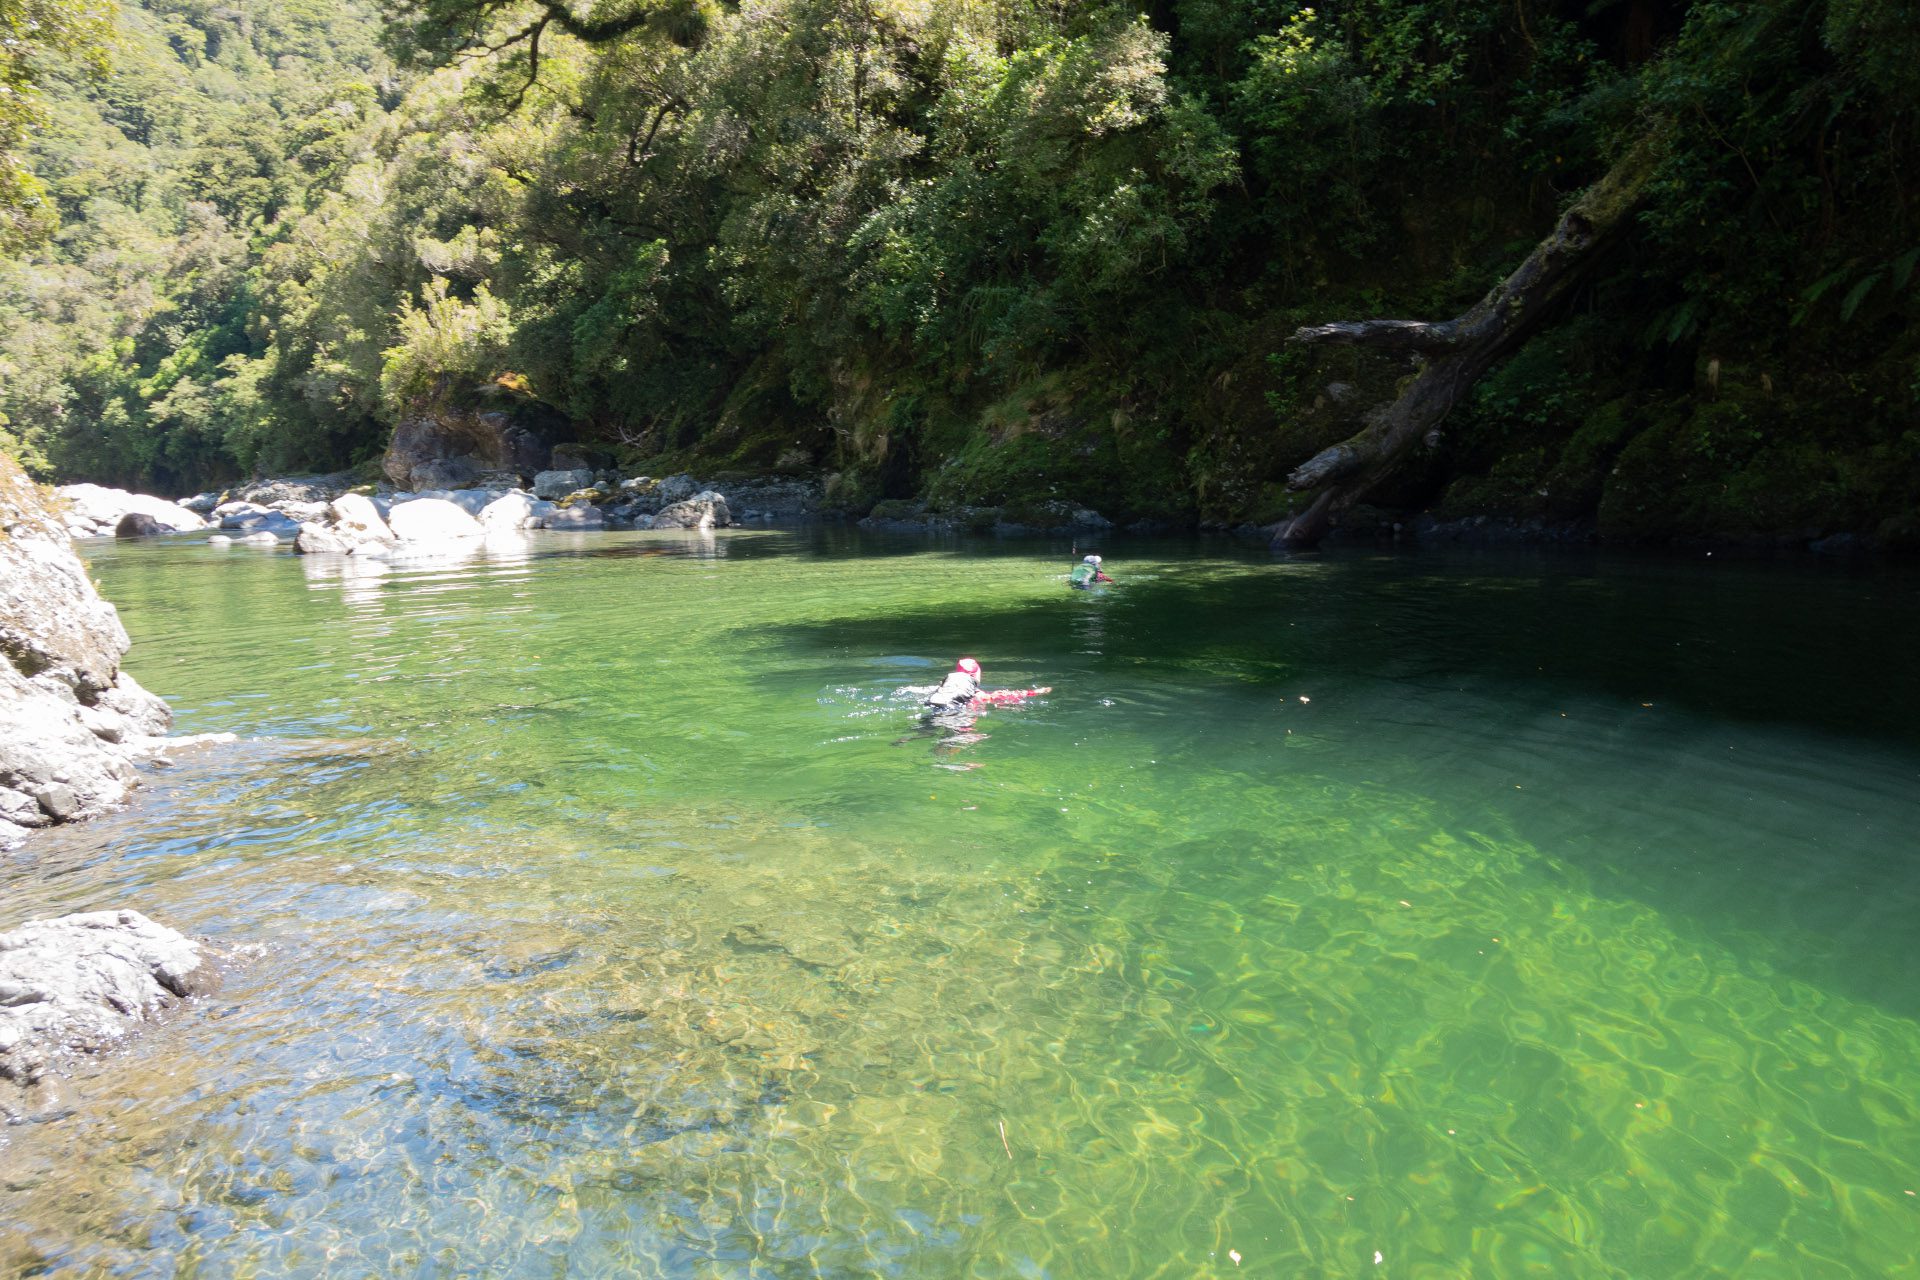 The first of many swims in the Waiohine Gorge